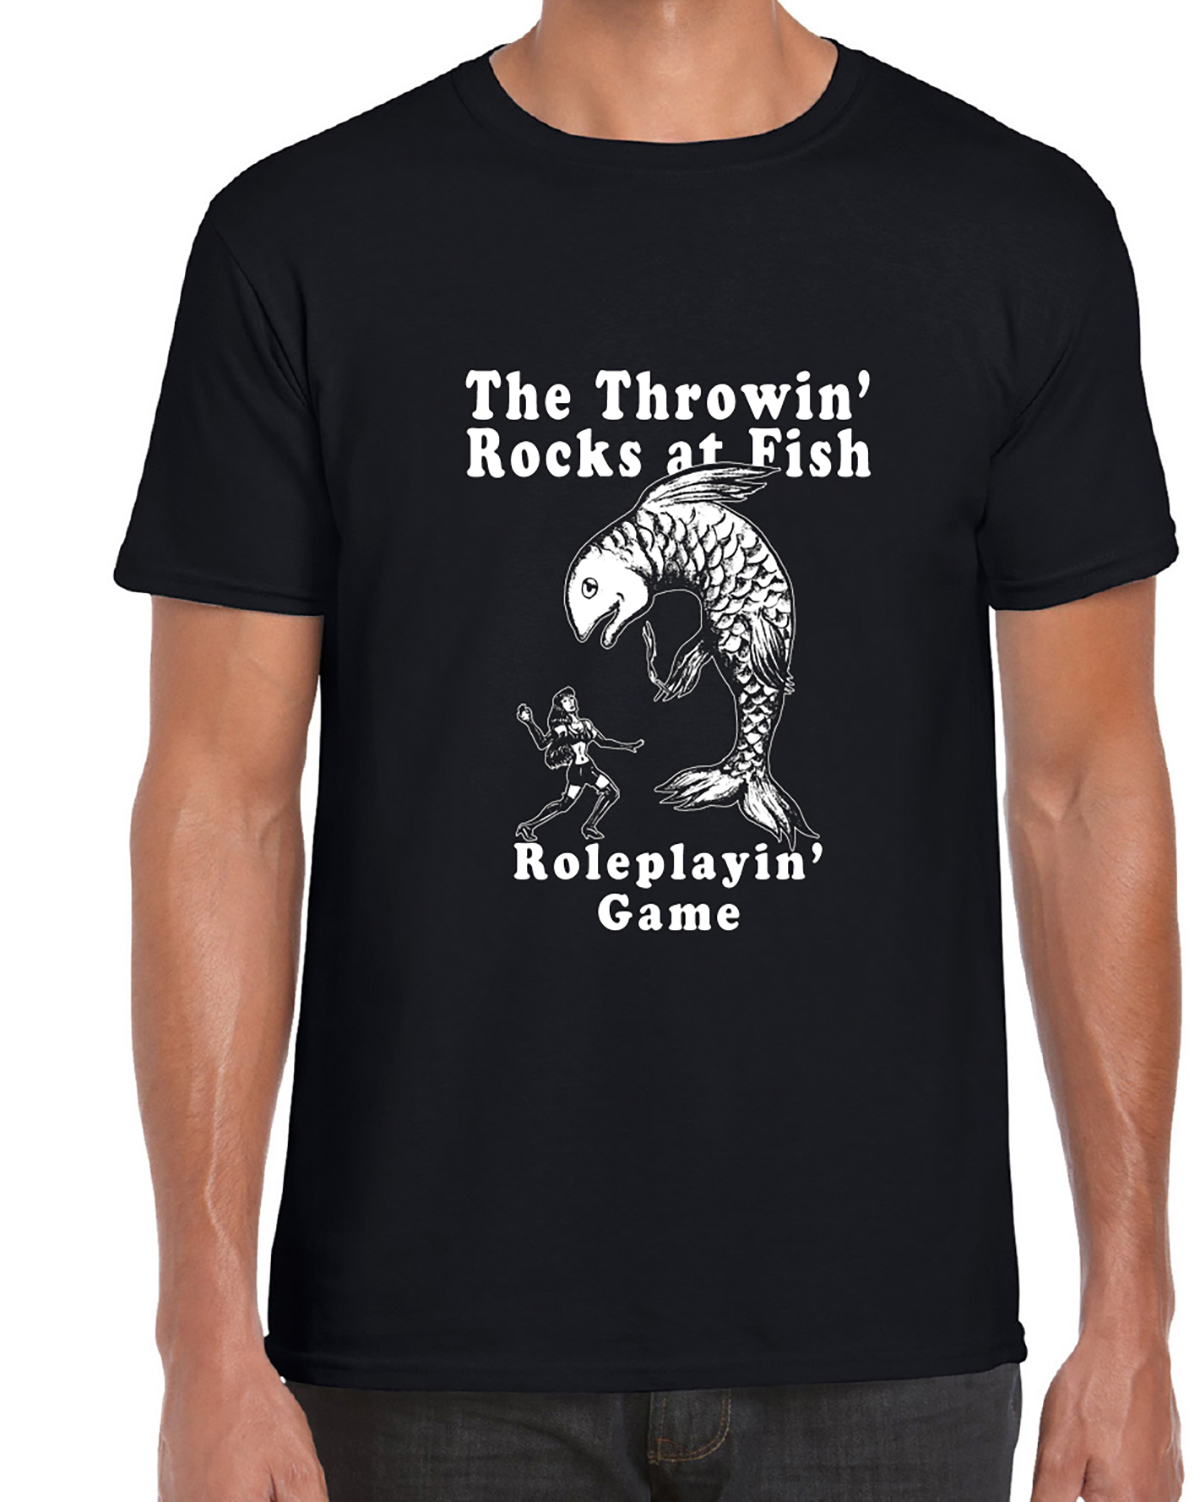 The Throwin' Rocks at Fish Roleplaying Game T-Shirt